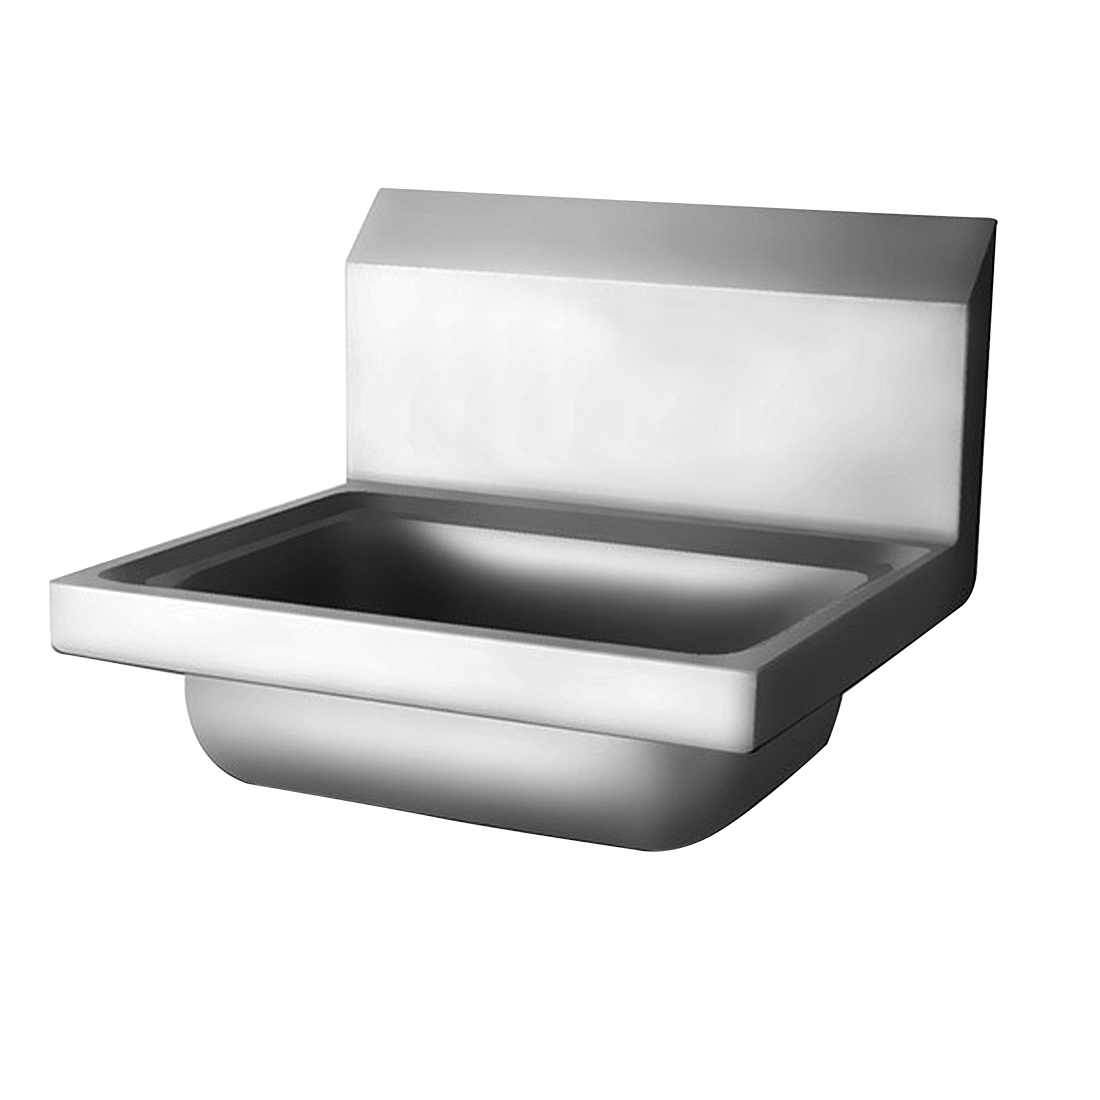 SHY-2N Stainless Steel Hand Basin